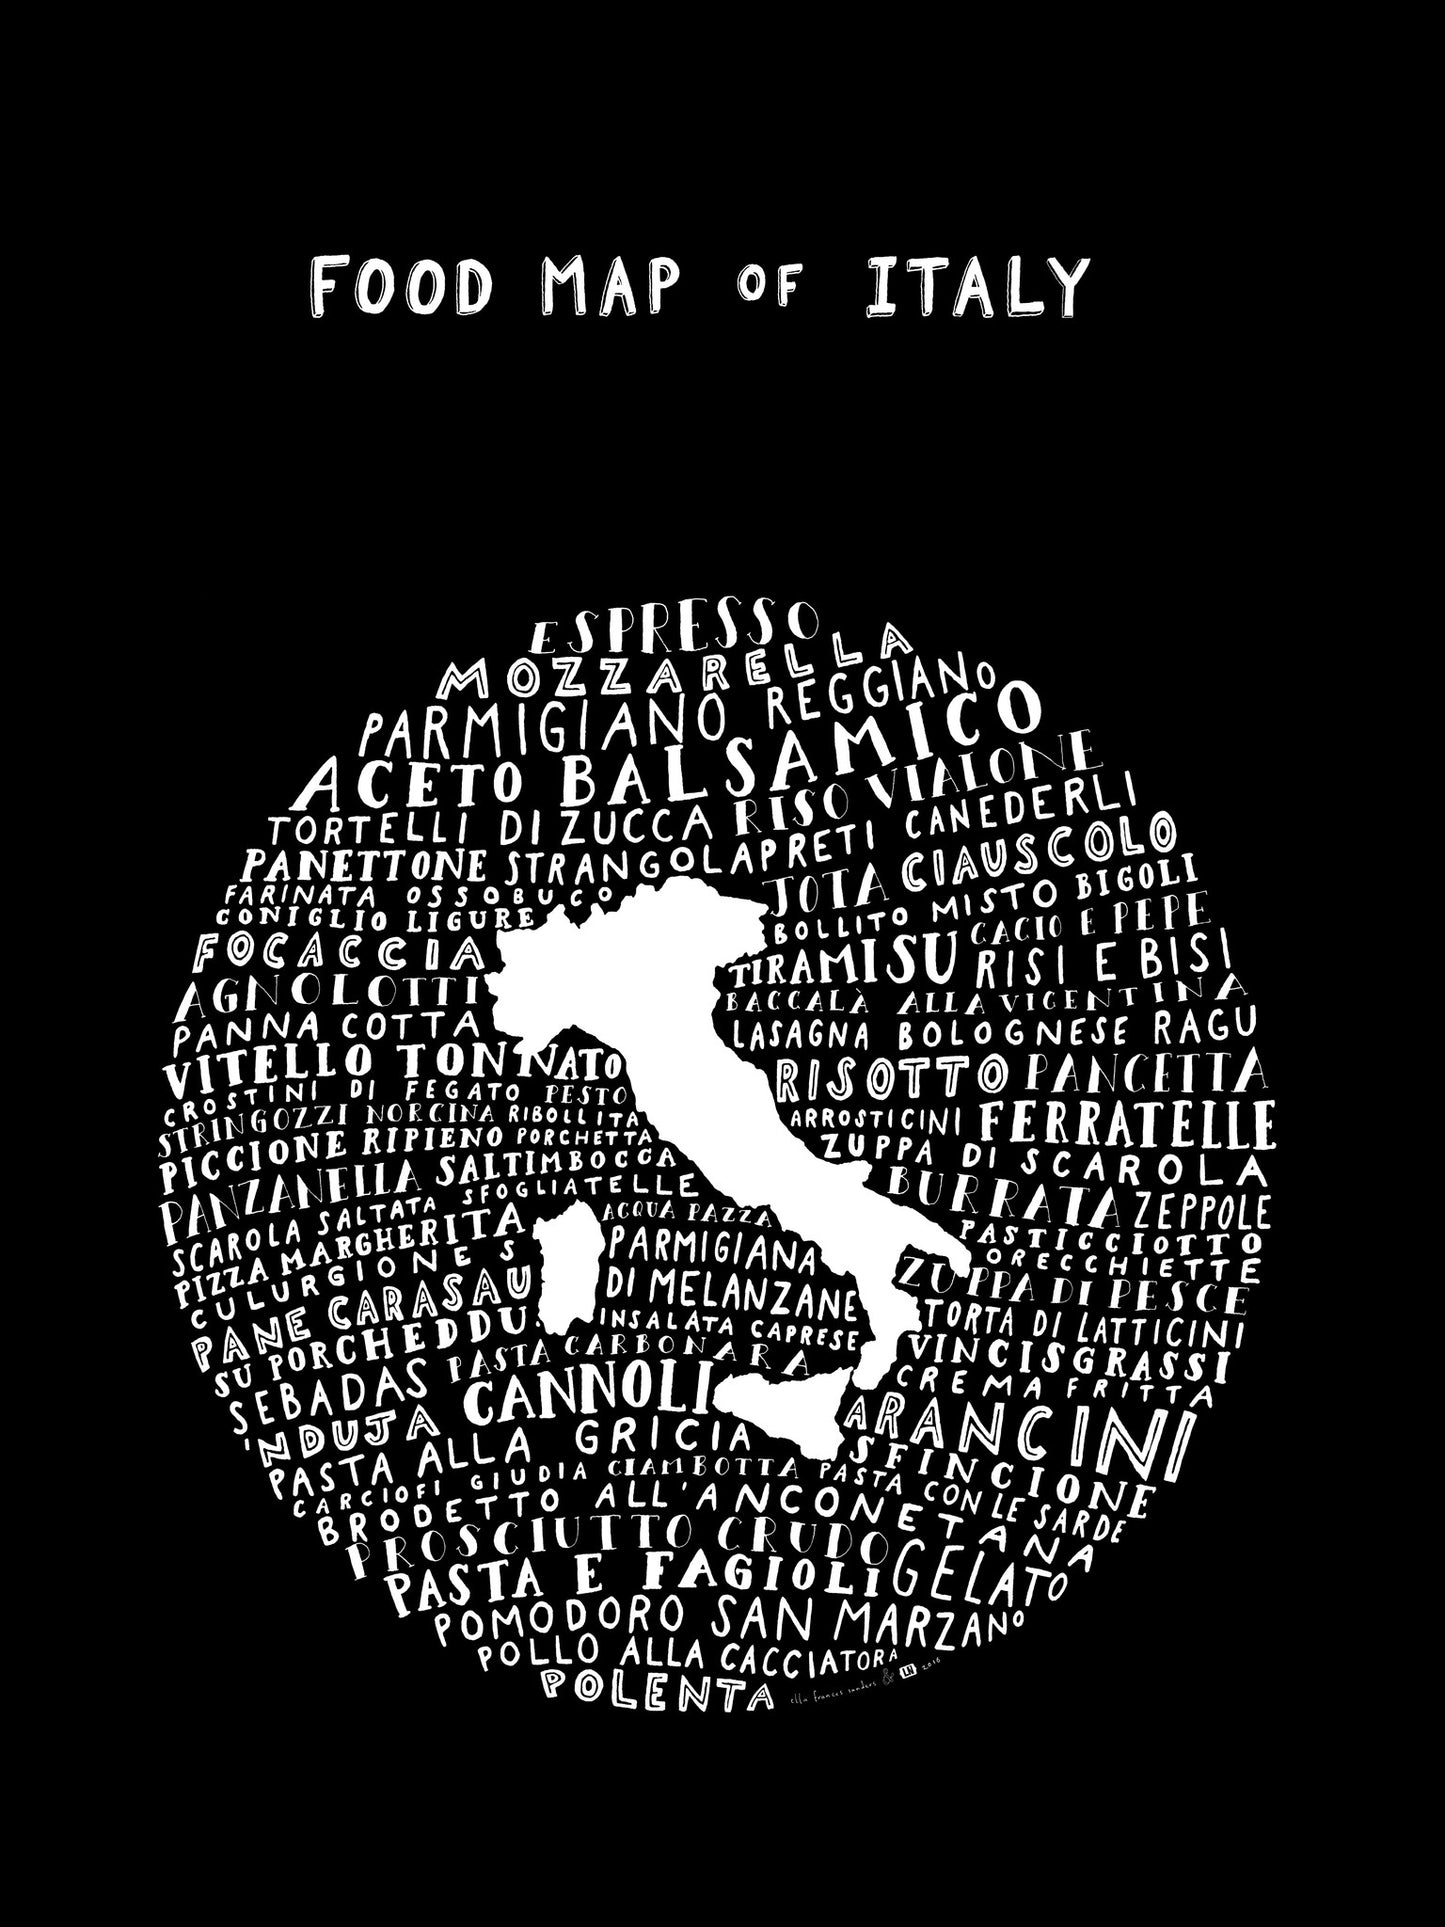 Food Map of Italy - Black Poster